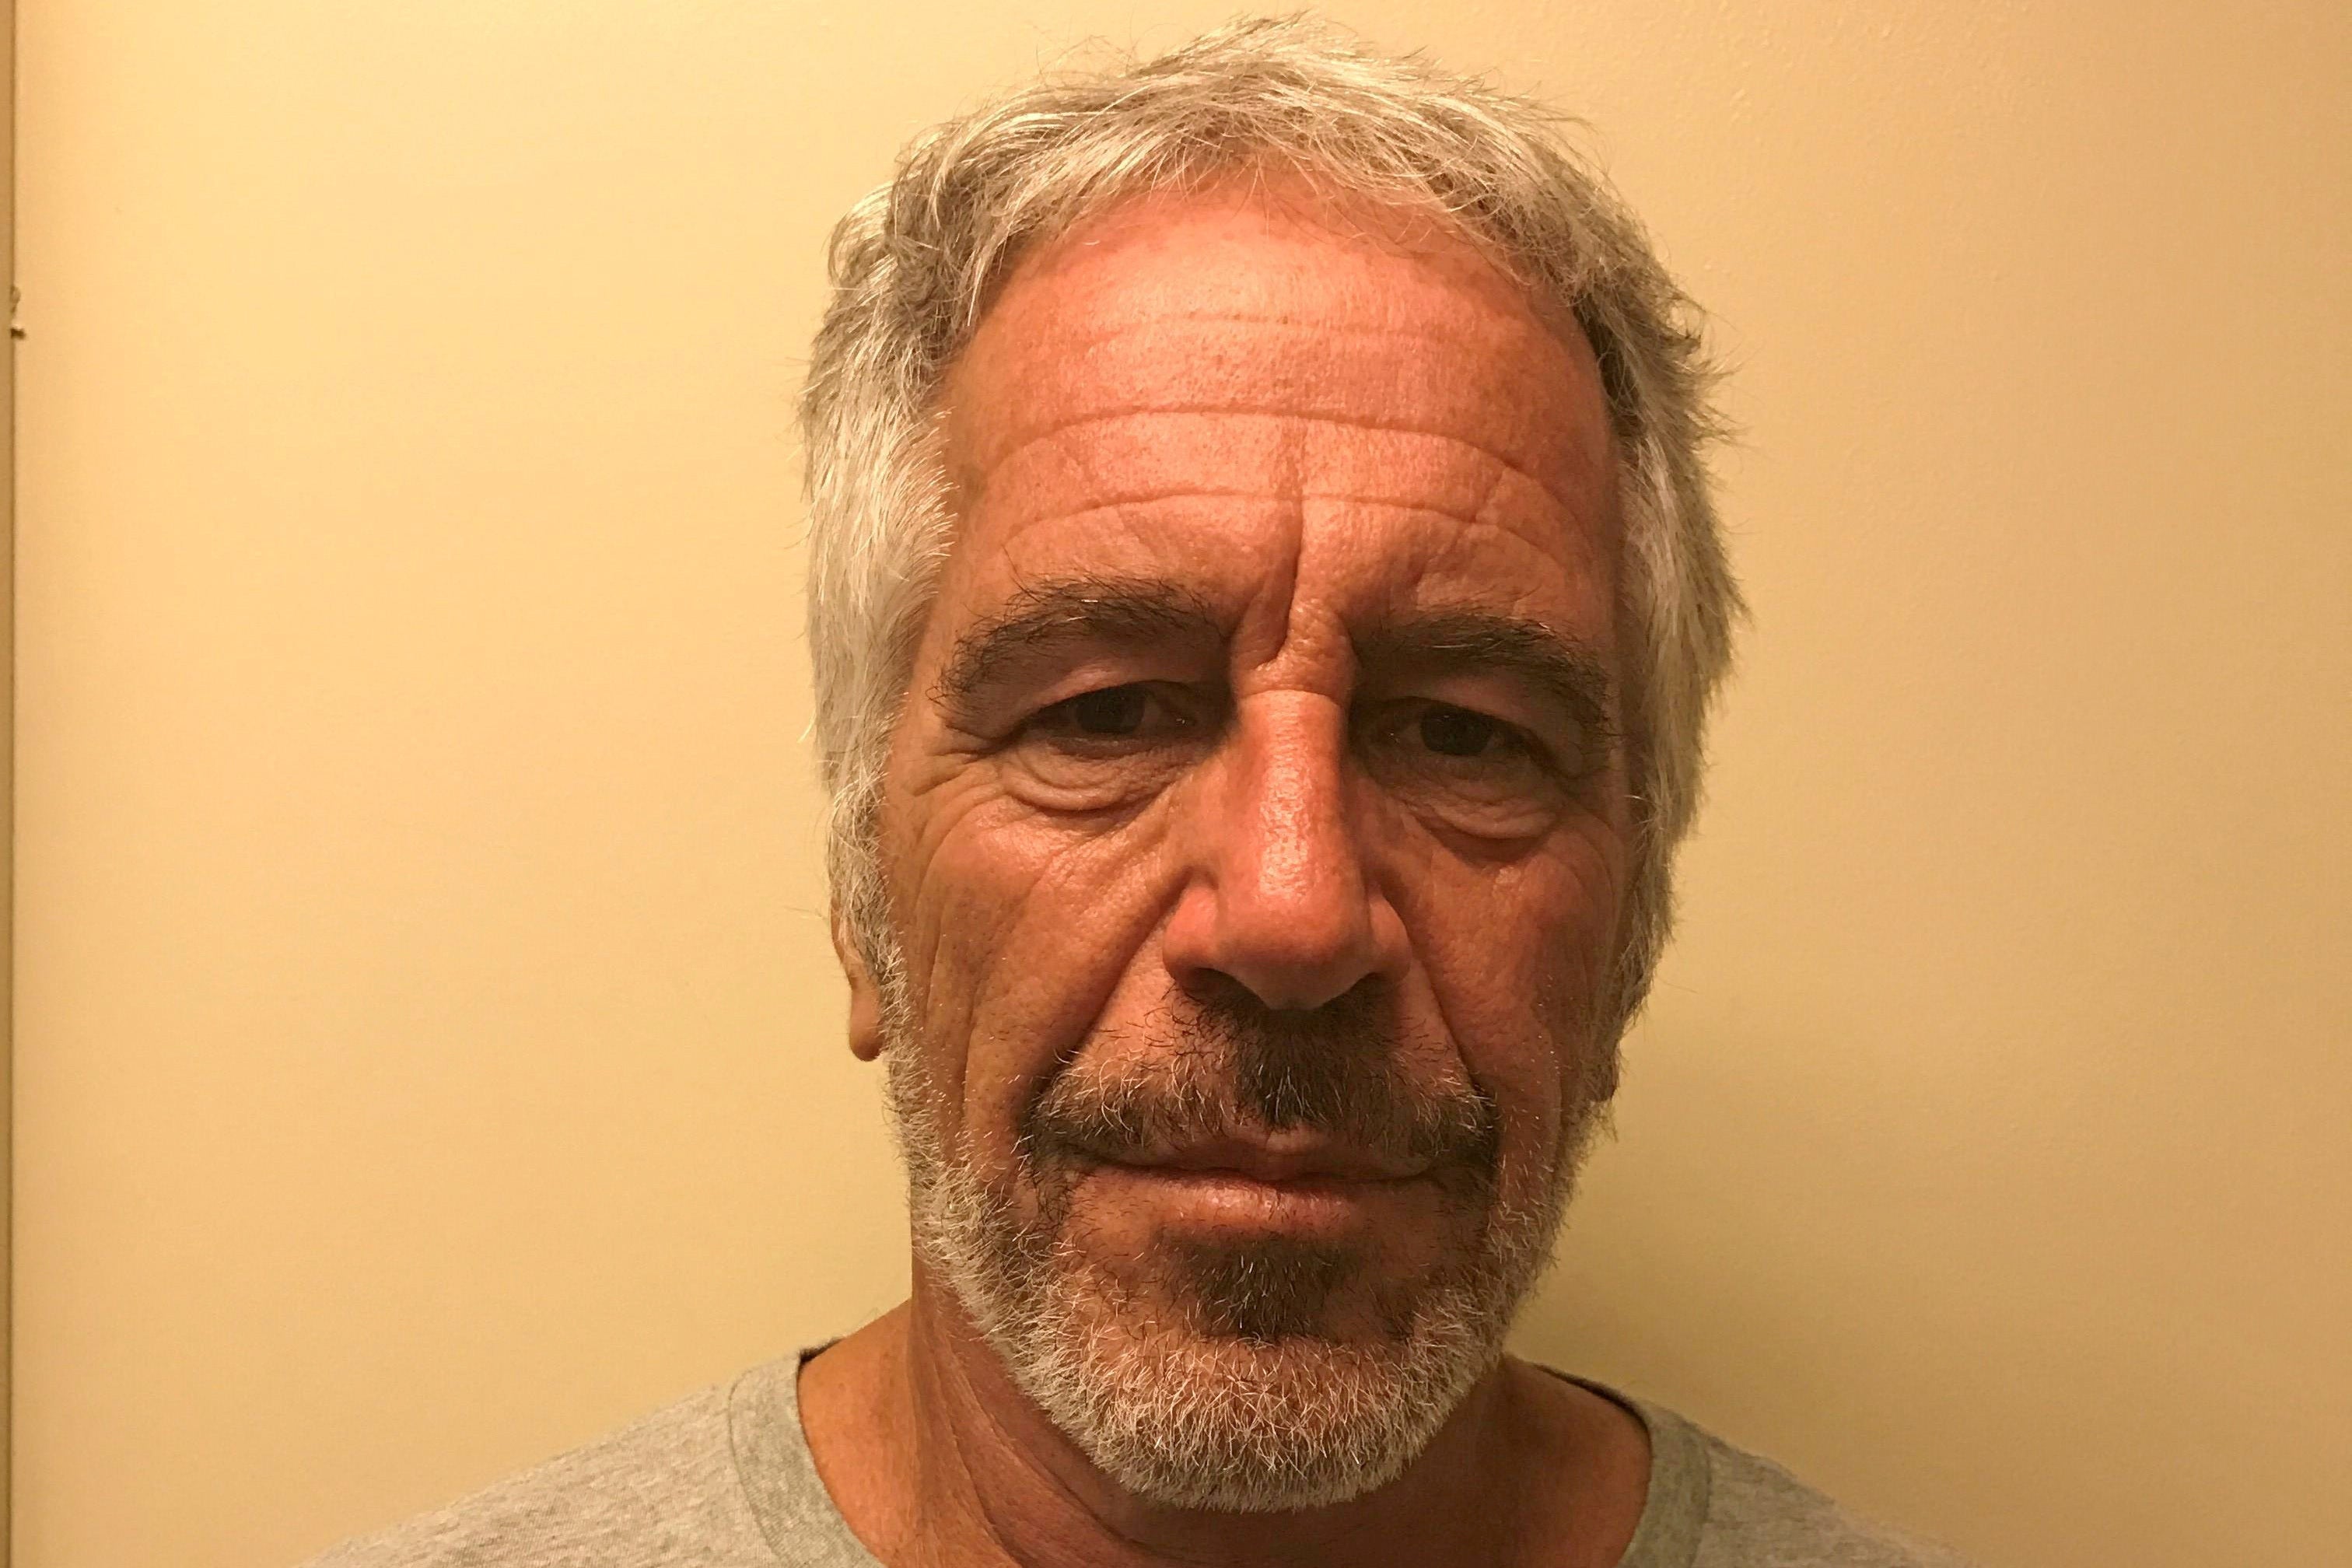 A judge ordered for the documents relating to Epstein (pictured) to be released last month